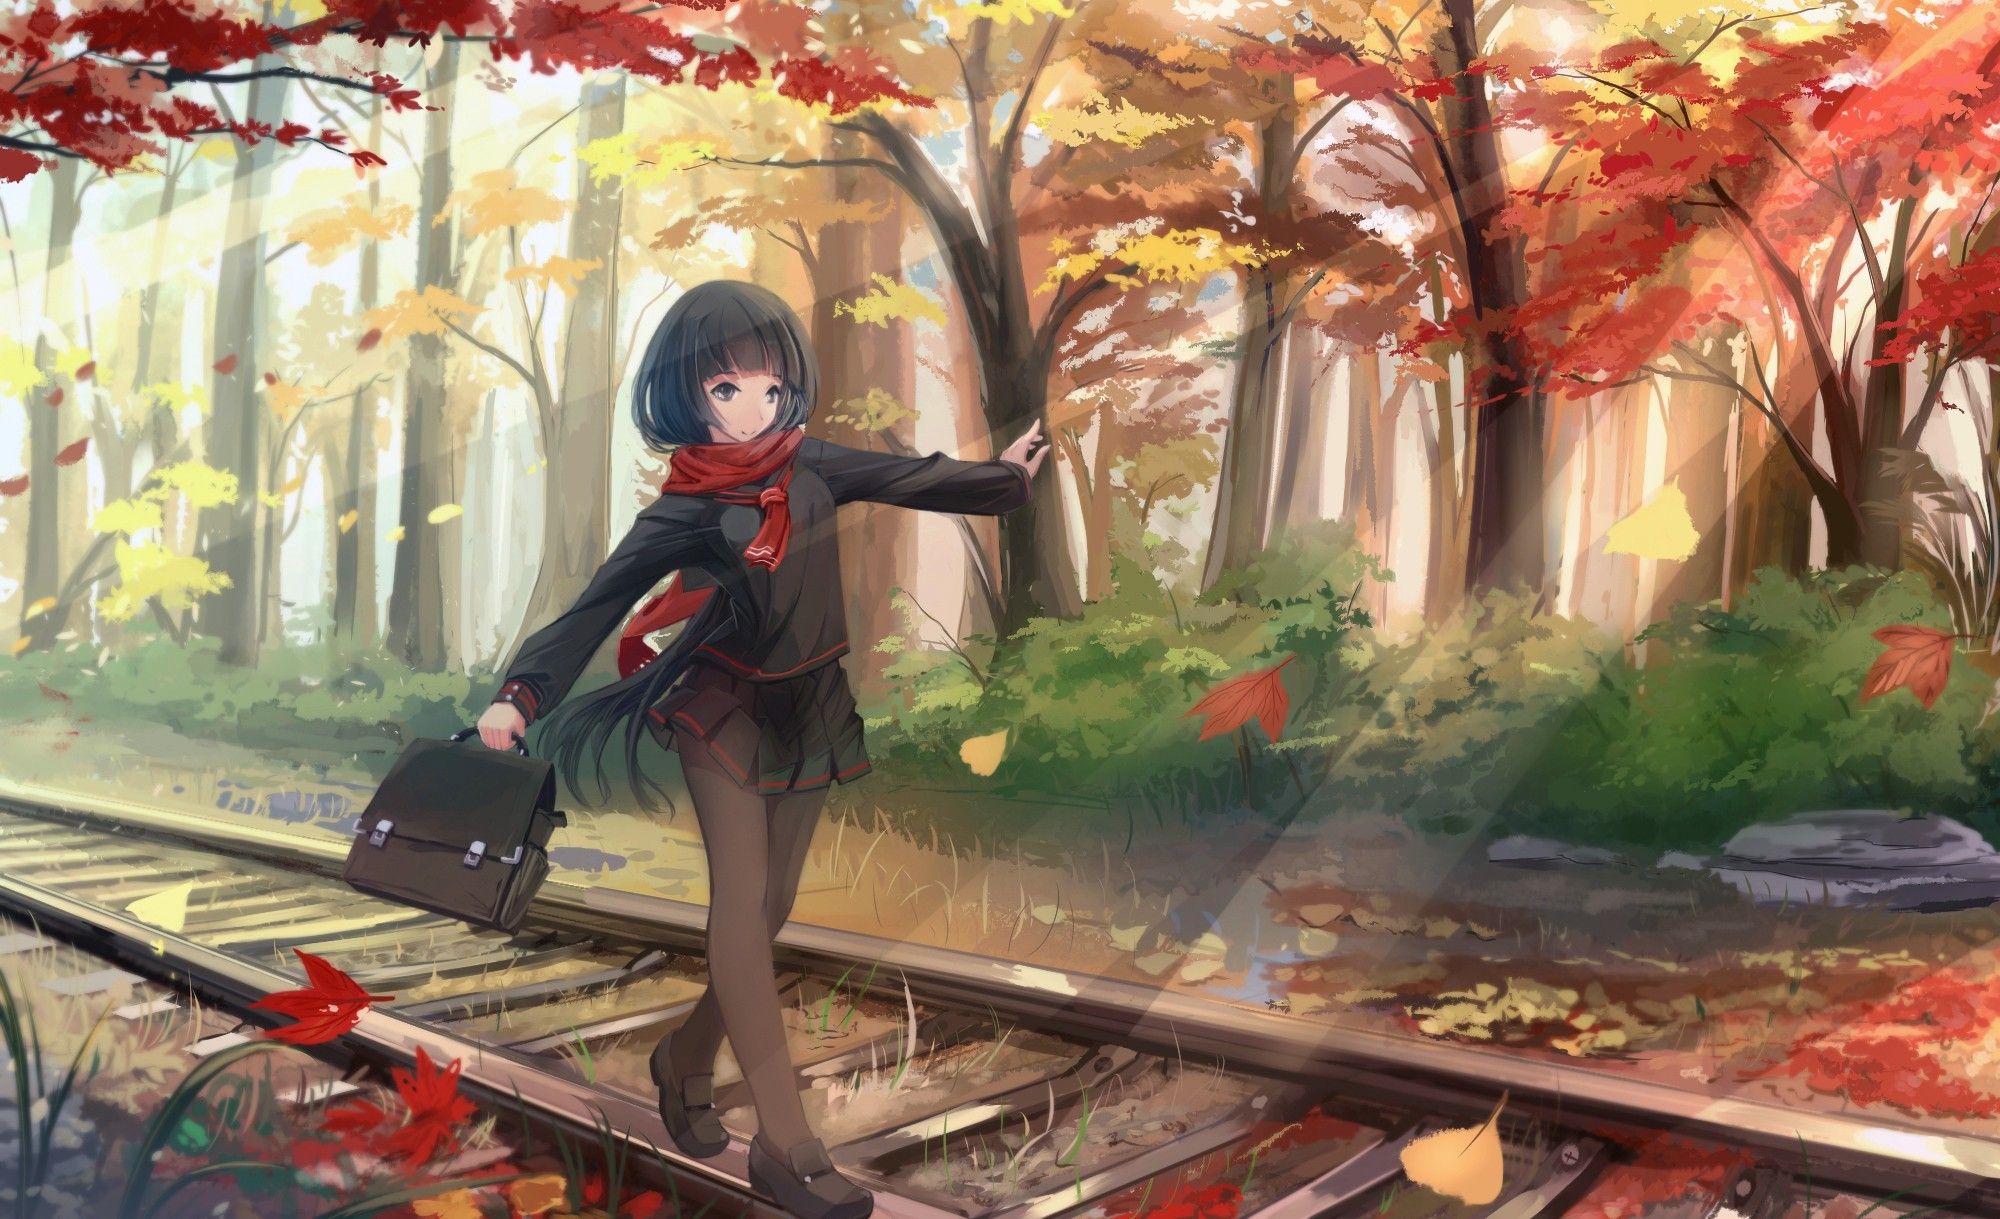 1,959 Fall Anime Images, Stock Photos & Vectors | Shutterstock